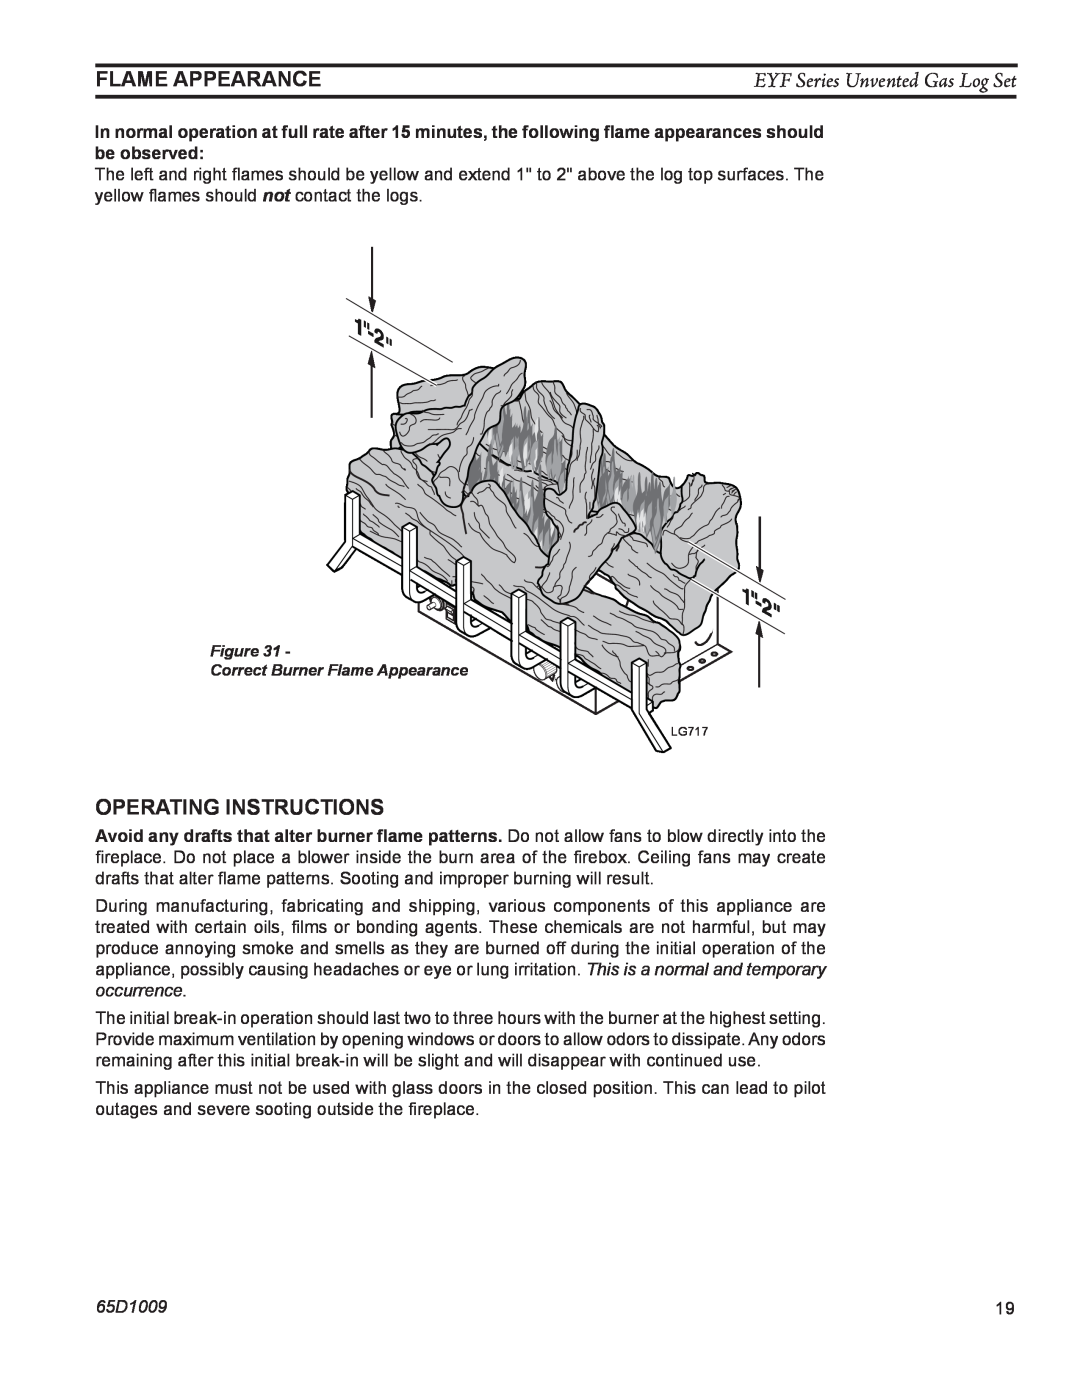 Monessen Hearth EYF18, EYF24 manual Operating Instructions, Flame Appearance, EYF Series Unvented Gas Log Set, 65D1009 